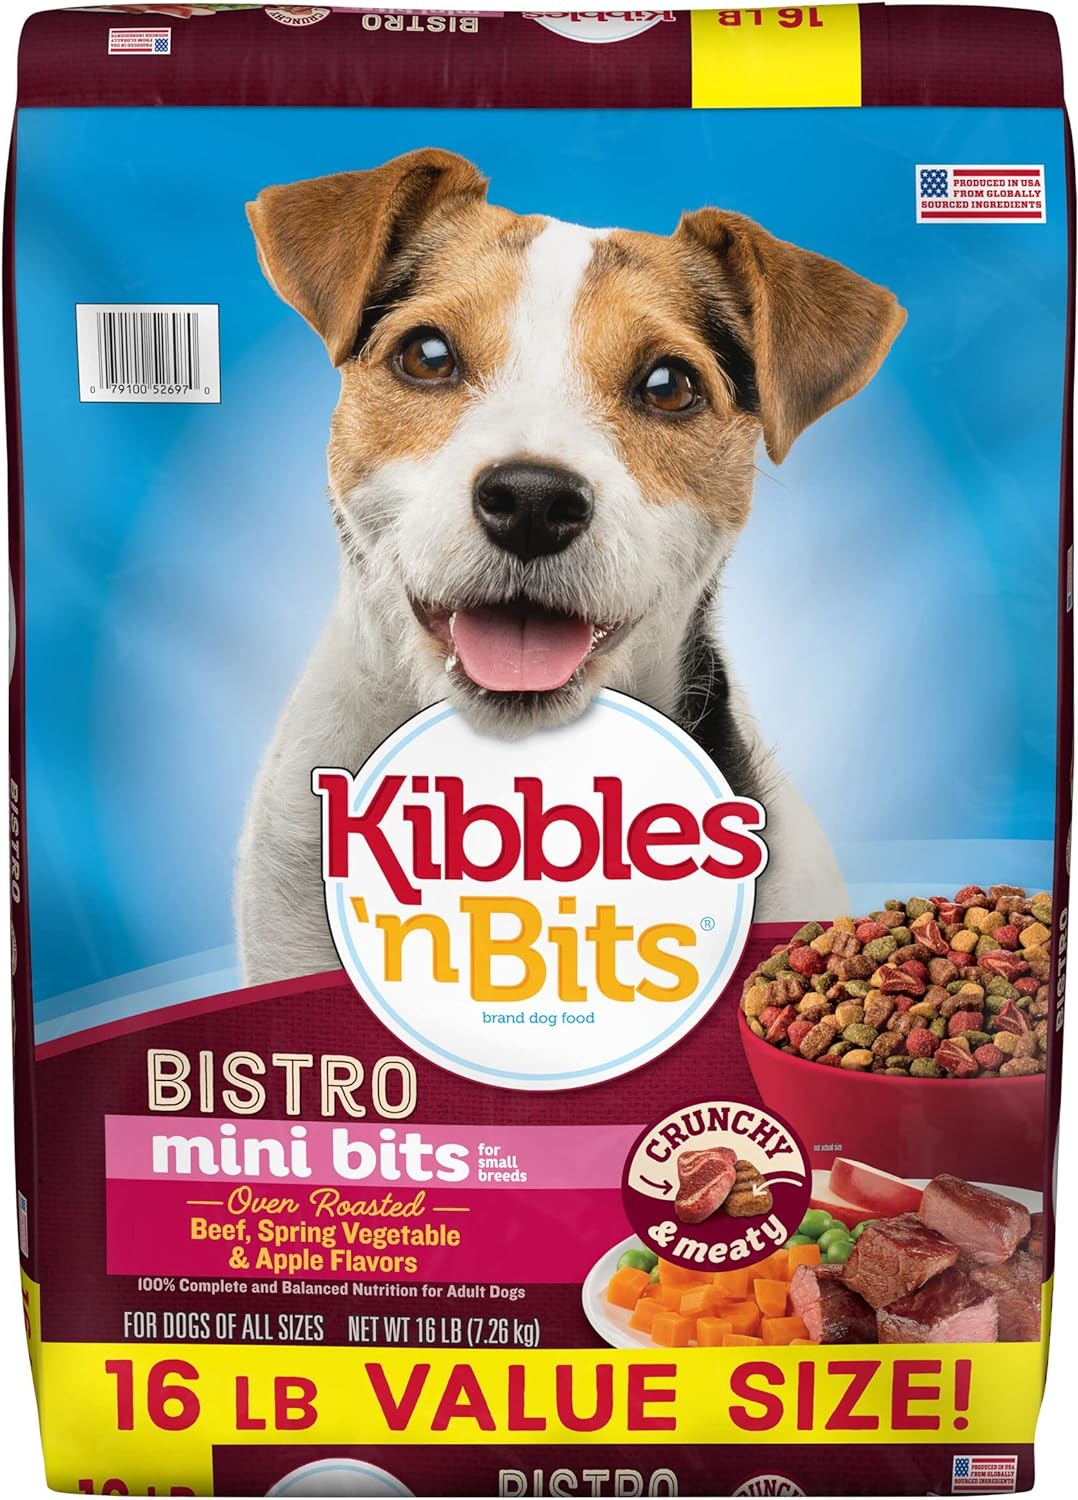 Kibbles 'n Bits Bistro Mini Bits Small Breed Oven Roasted Beef Flavor Dry Dog Food, 16 Pound Bag